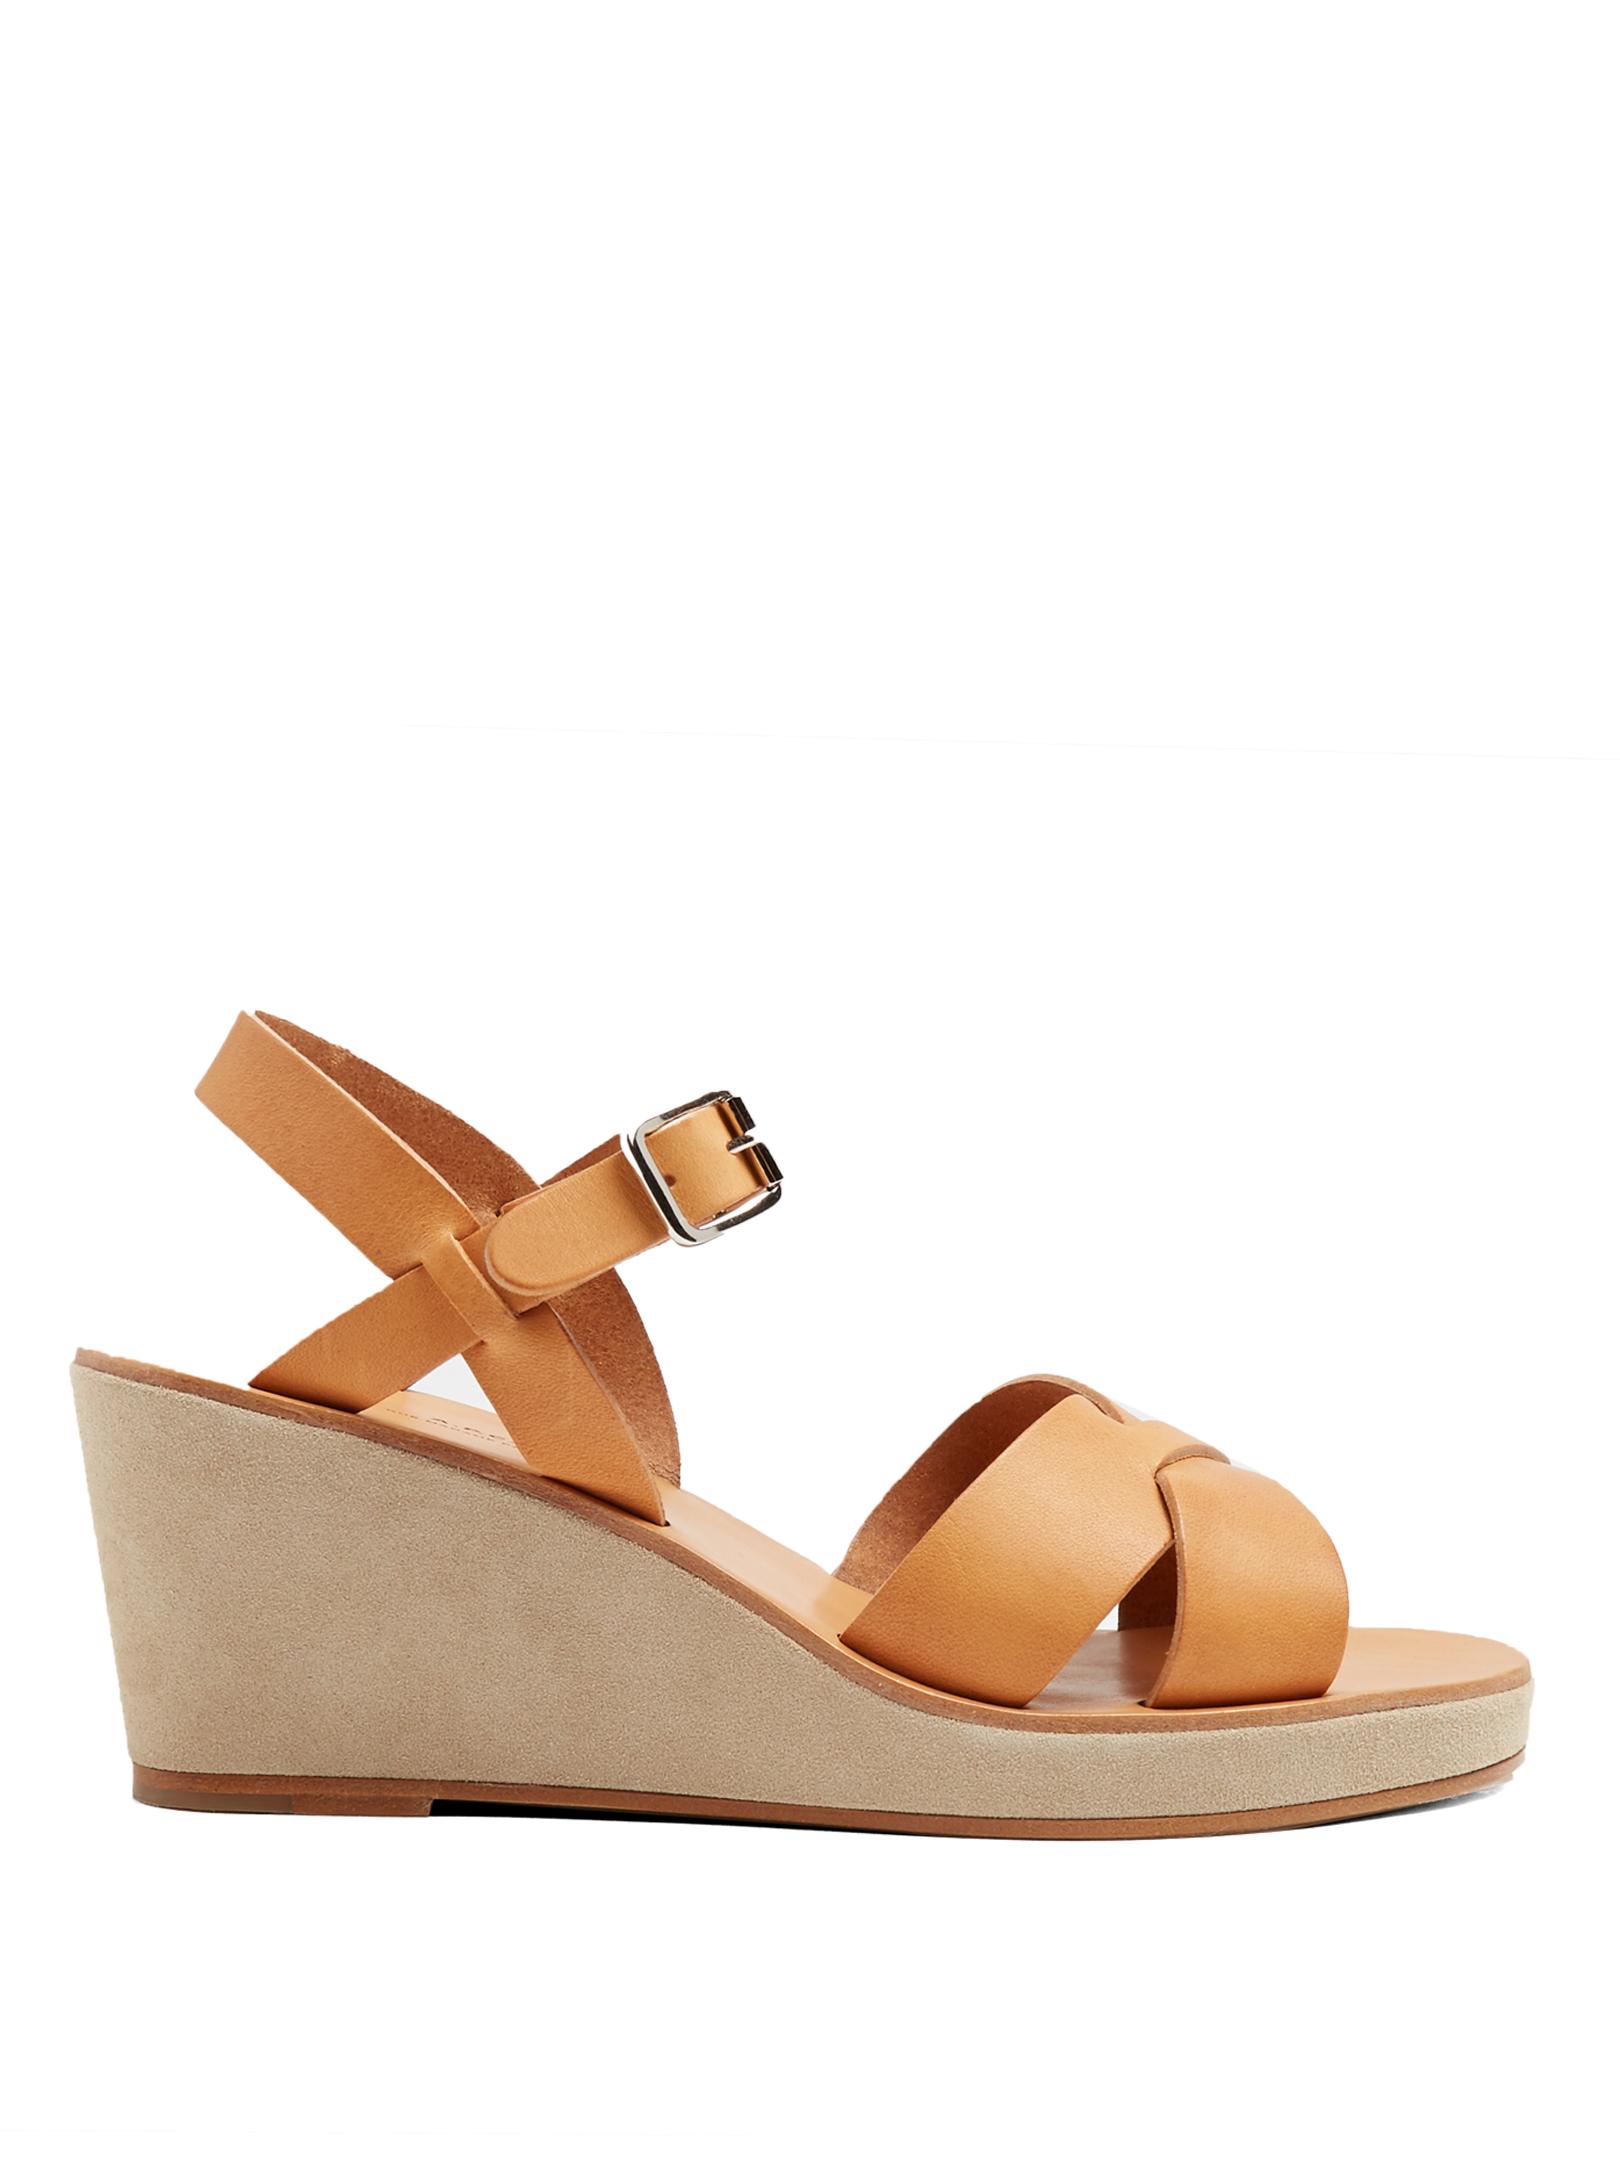 Lyst - A.P.C. Classic Leather And Suede Wedges in Natural